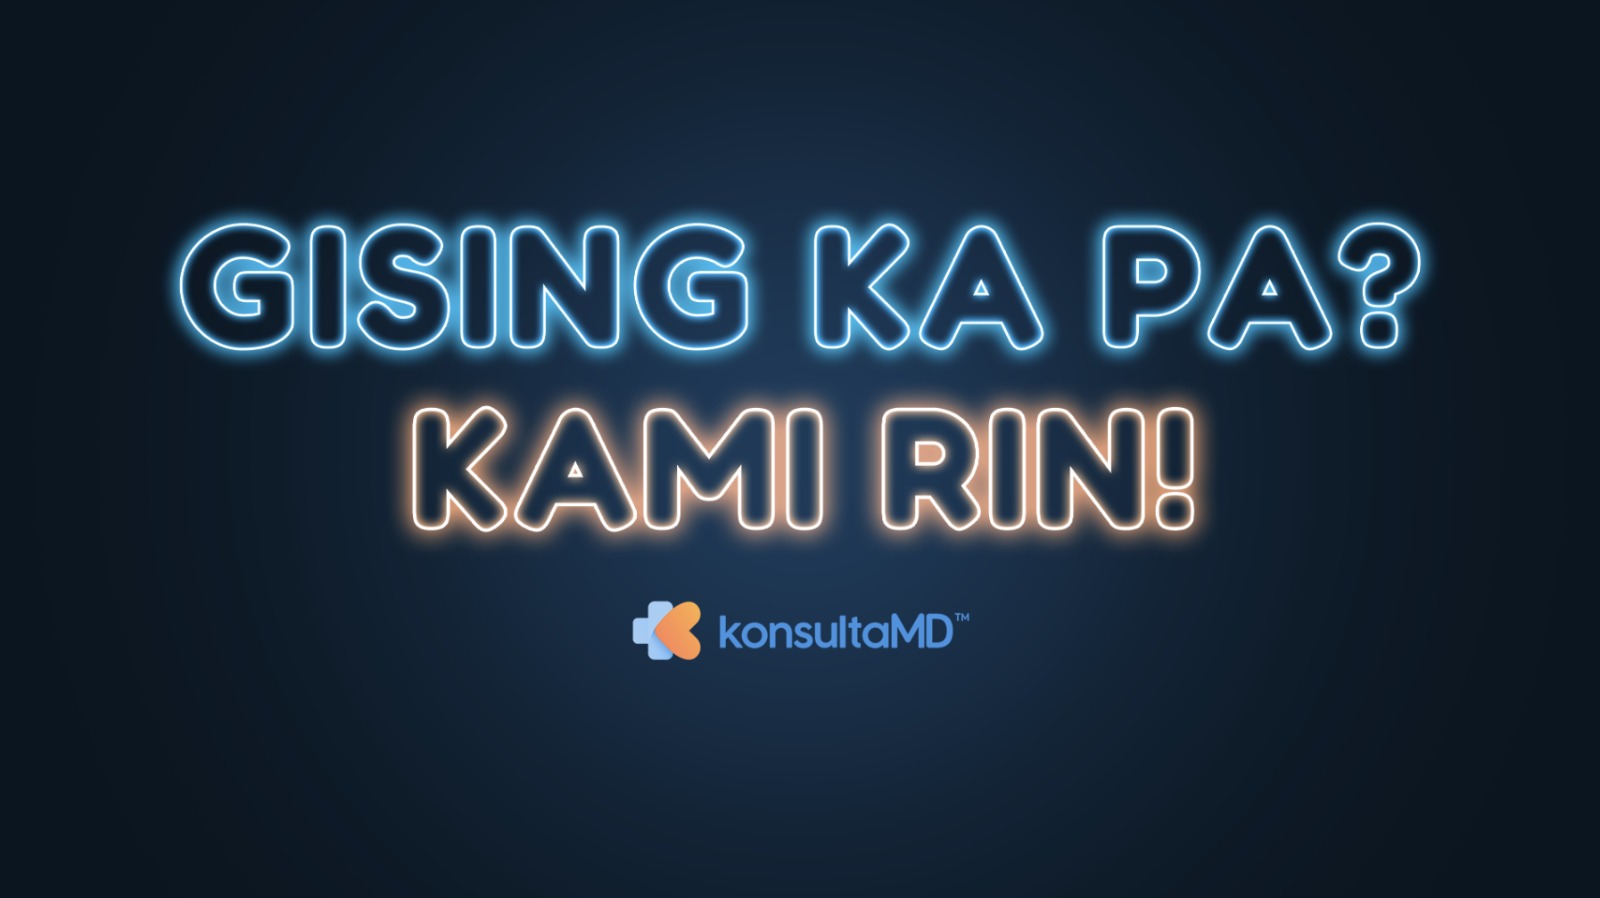 Introducing KonsultaMD Pharmacy, the first 24/7 medicine delivery service in the Philippines